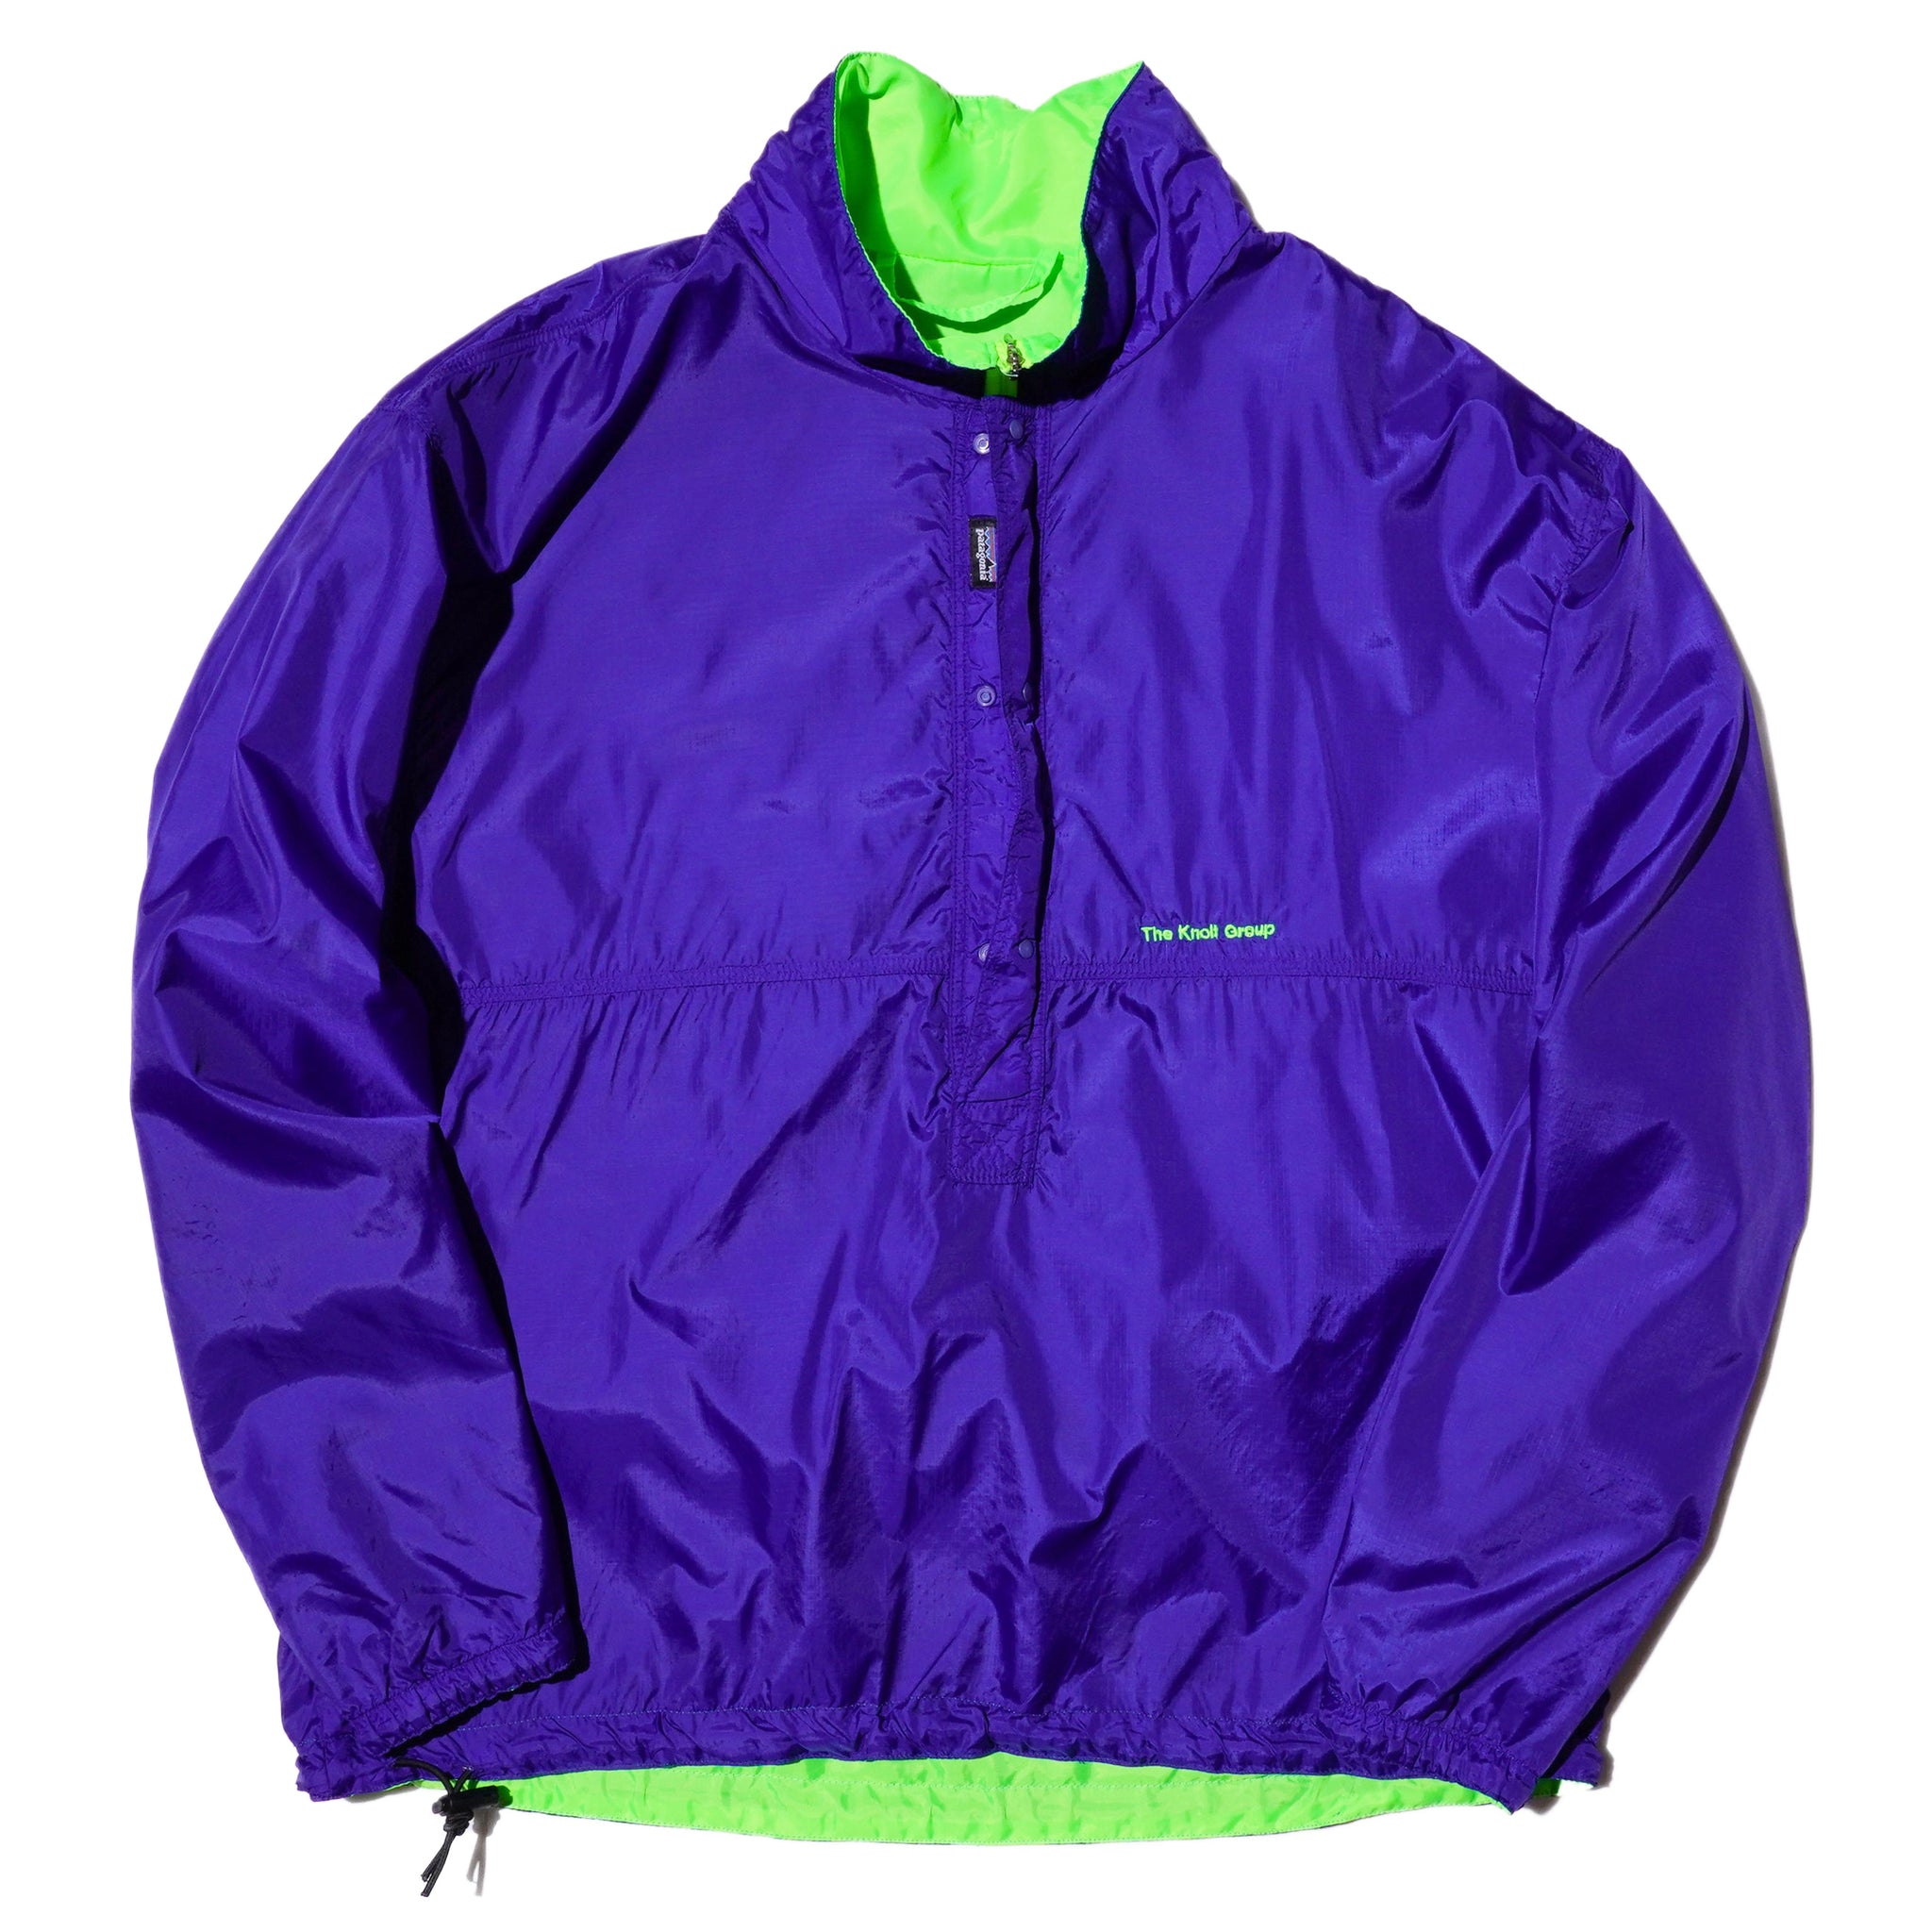 PATAGONIA 90s NYLON REVERSIBLE WINDBREAKER PULLOVER (THE KNOLL GROUP ...